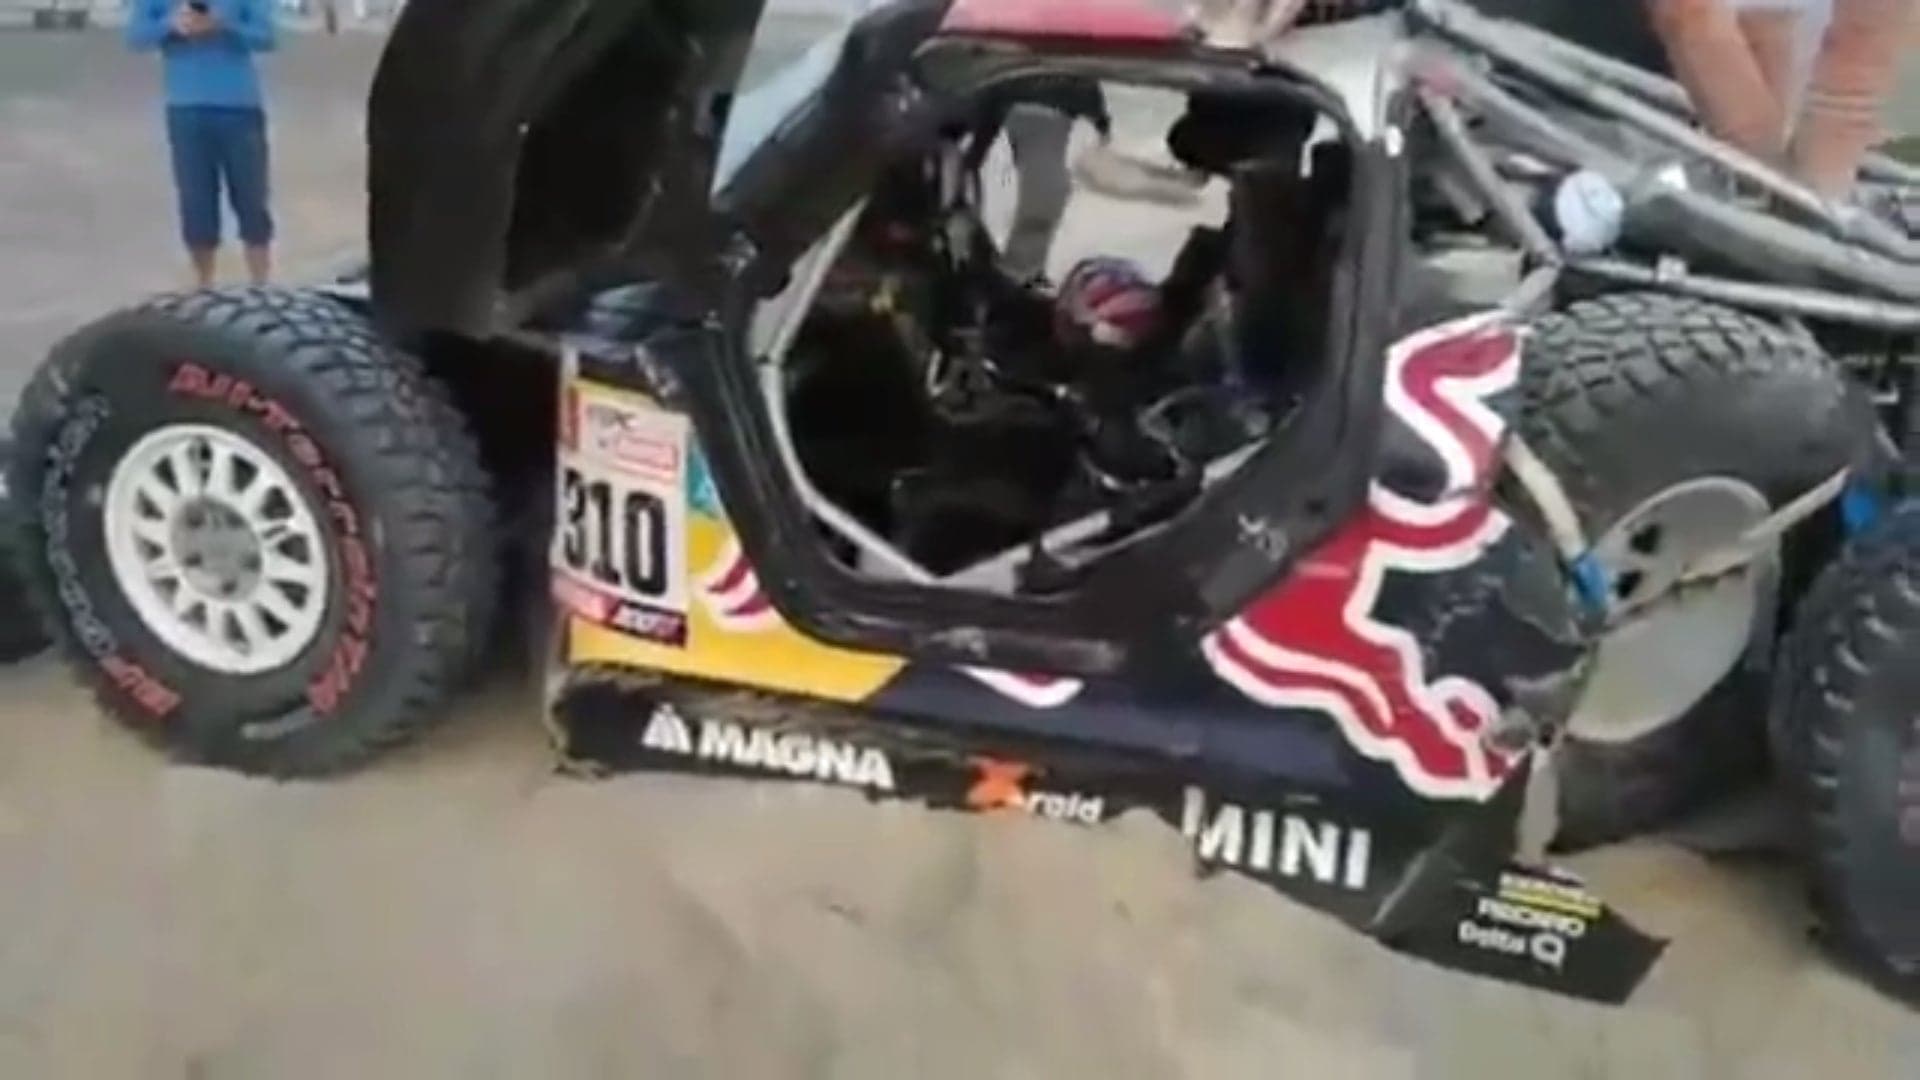 Americans Chance at Dakar Glory Ends with a Somersaulting Mini